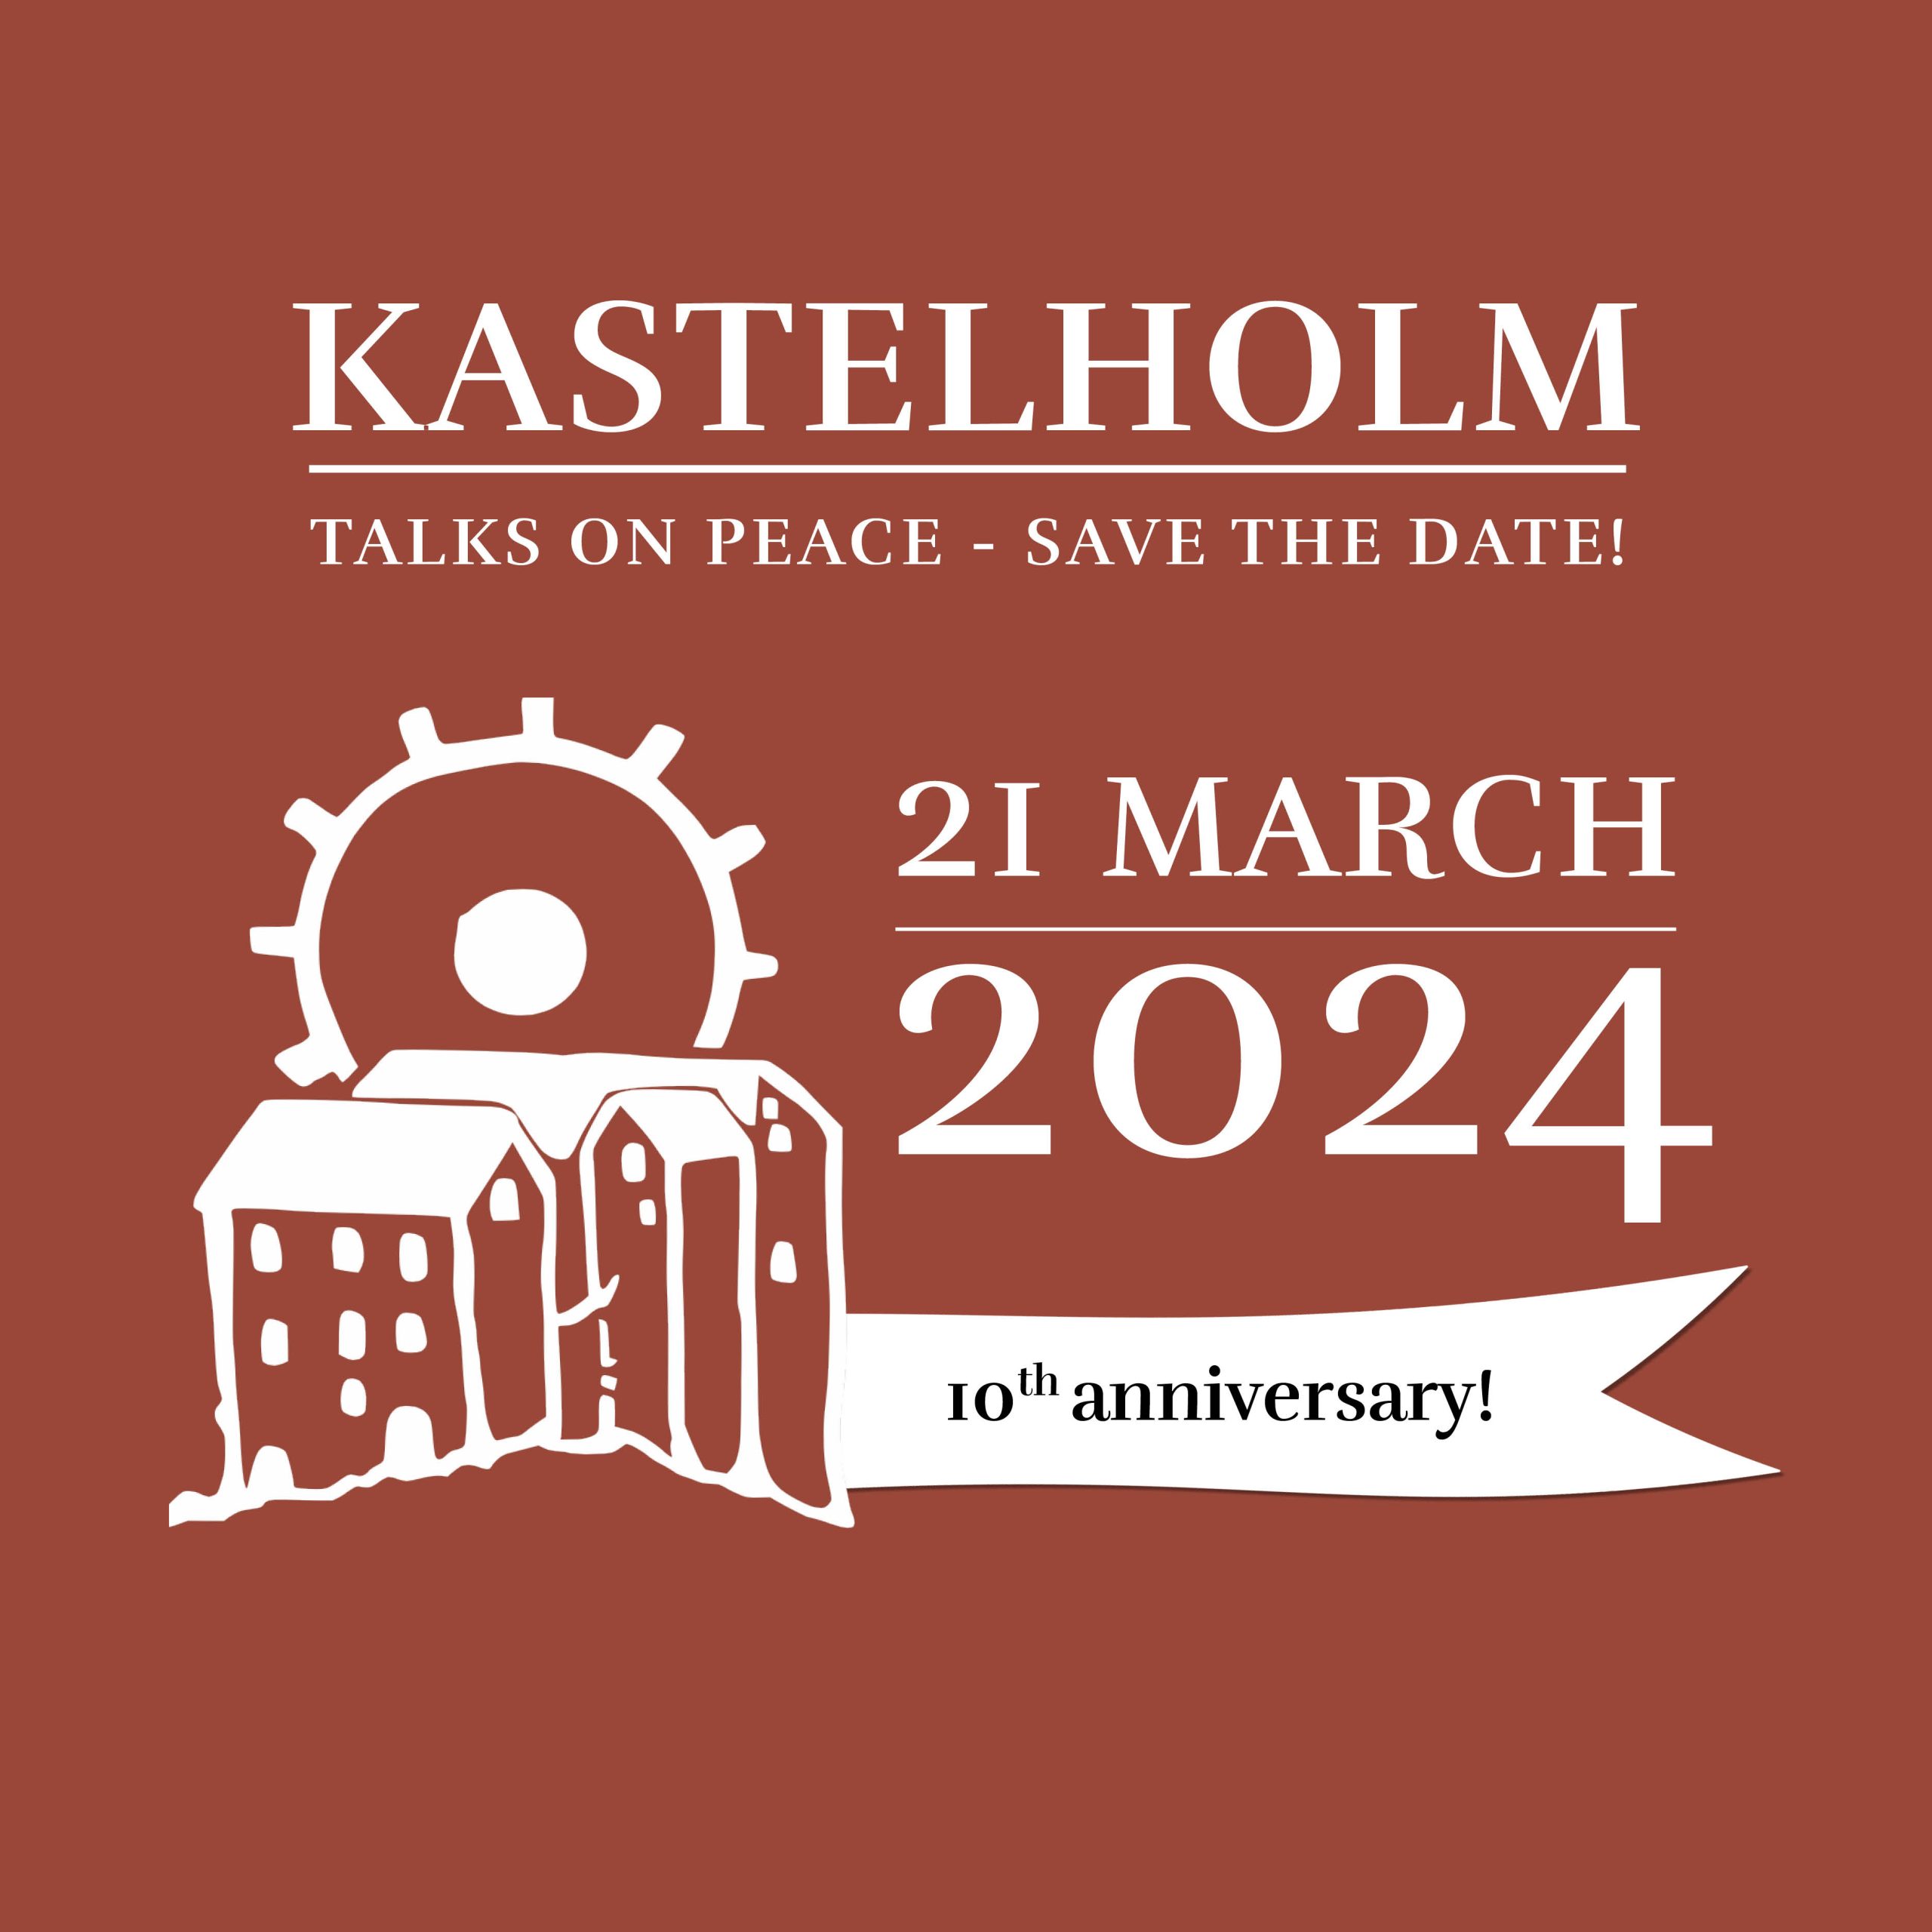 Save The Date! Kastelholm Talks on Peace 2024 - 21 st of March. An event by the Åland Islands Peace Institute